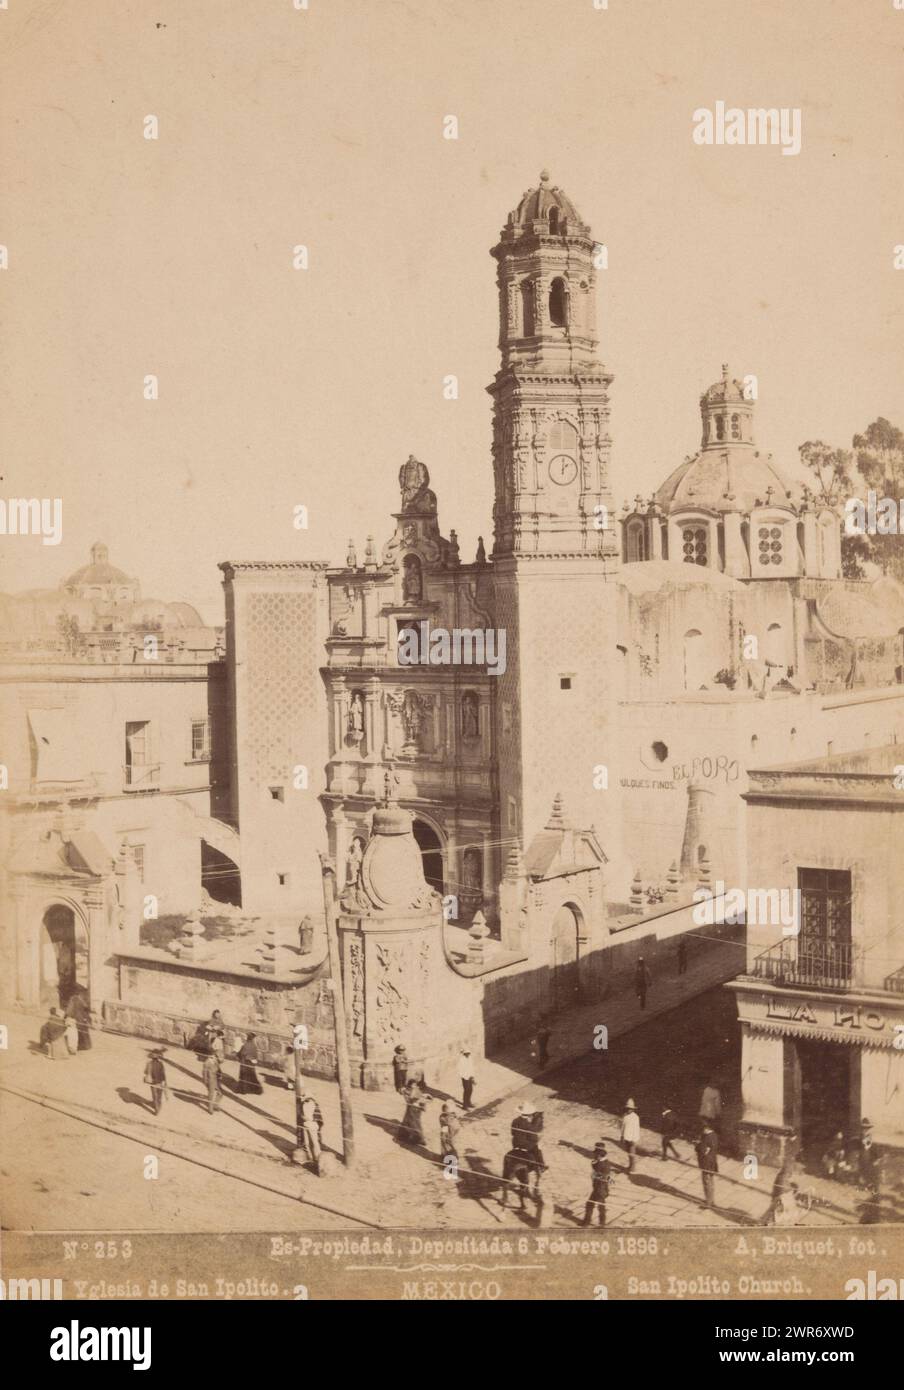 View of the San Hipólito y Casiano in Mexico City, Yglesia de San Ipolito / San Ipolito Church (title on object), Mexico (series title on object), Abel Briquet, Mexico-Stad, 1896, paper, albumen print, height 193 mm × width 133 mm, height 210 mm × width 160 mm, photograph Stock Photo